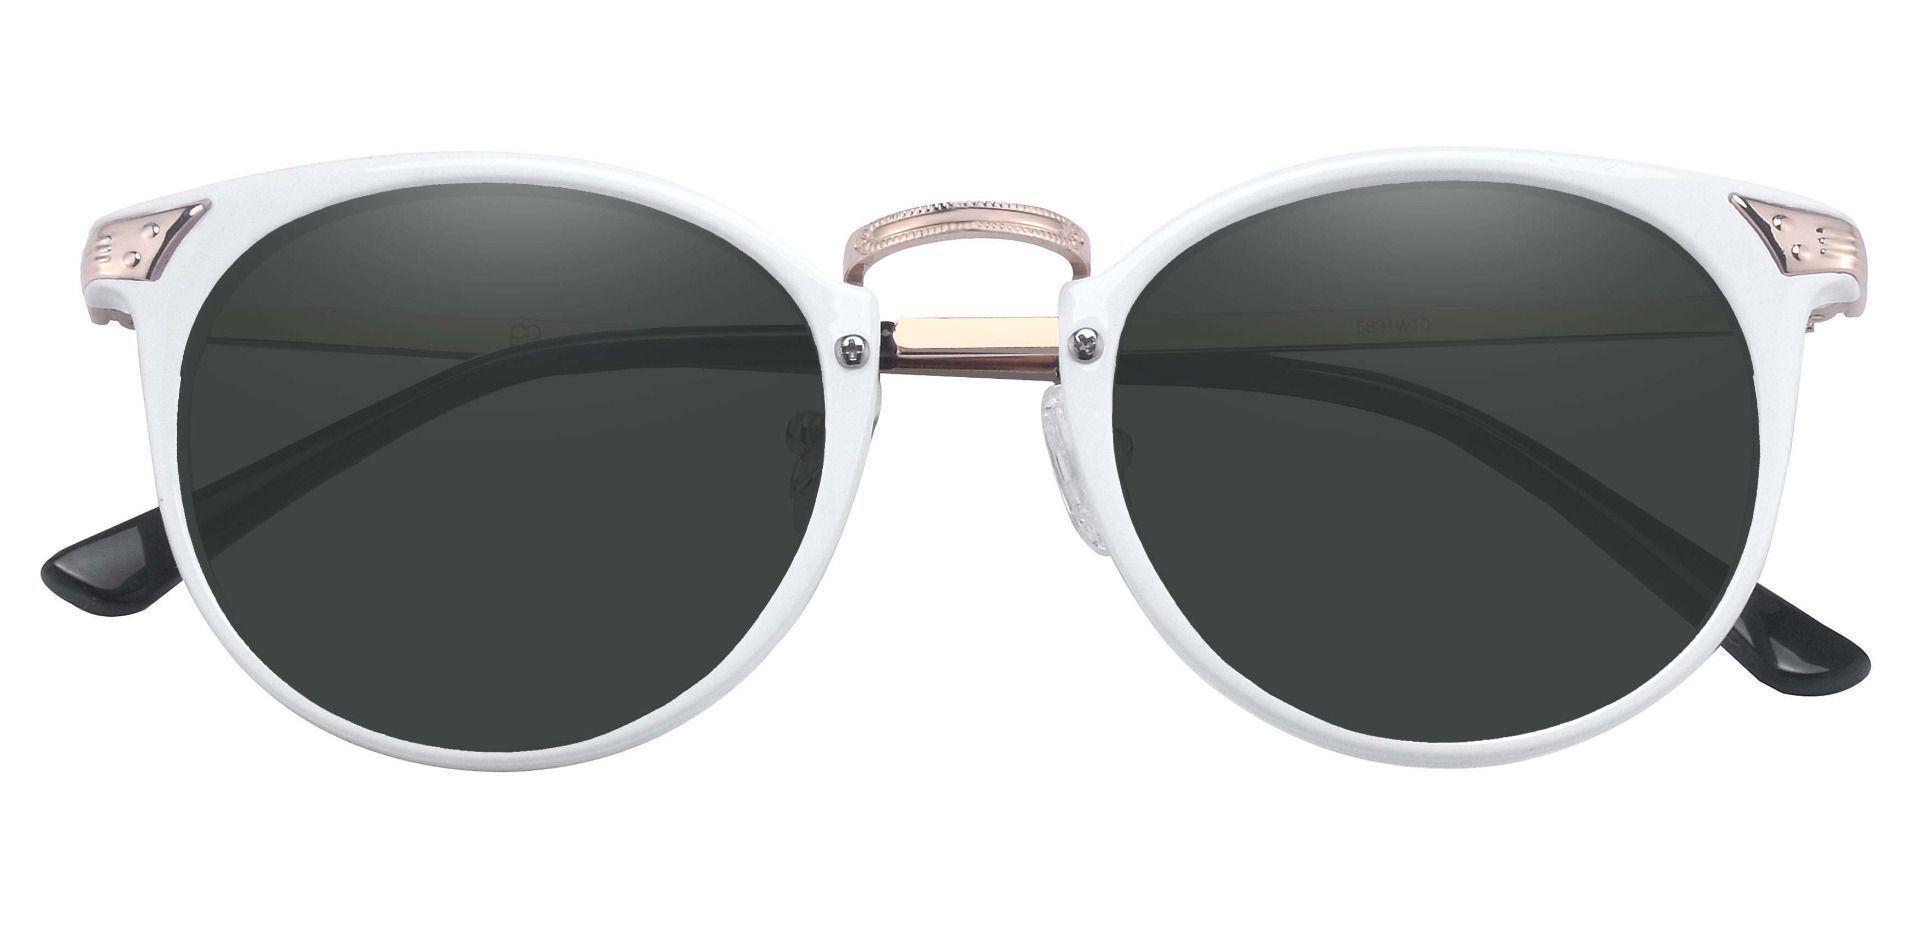 Blackwell Round Non-Rx Sunglasses - White Frame With Gray Lenses